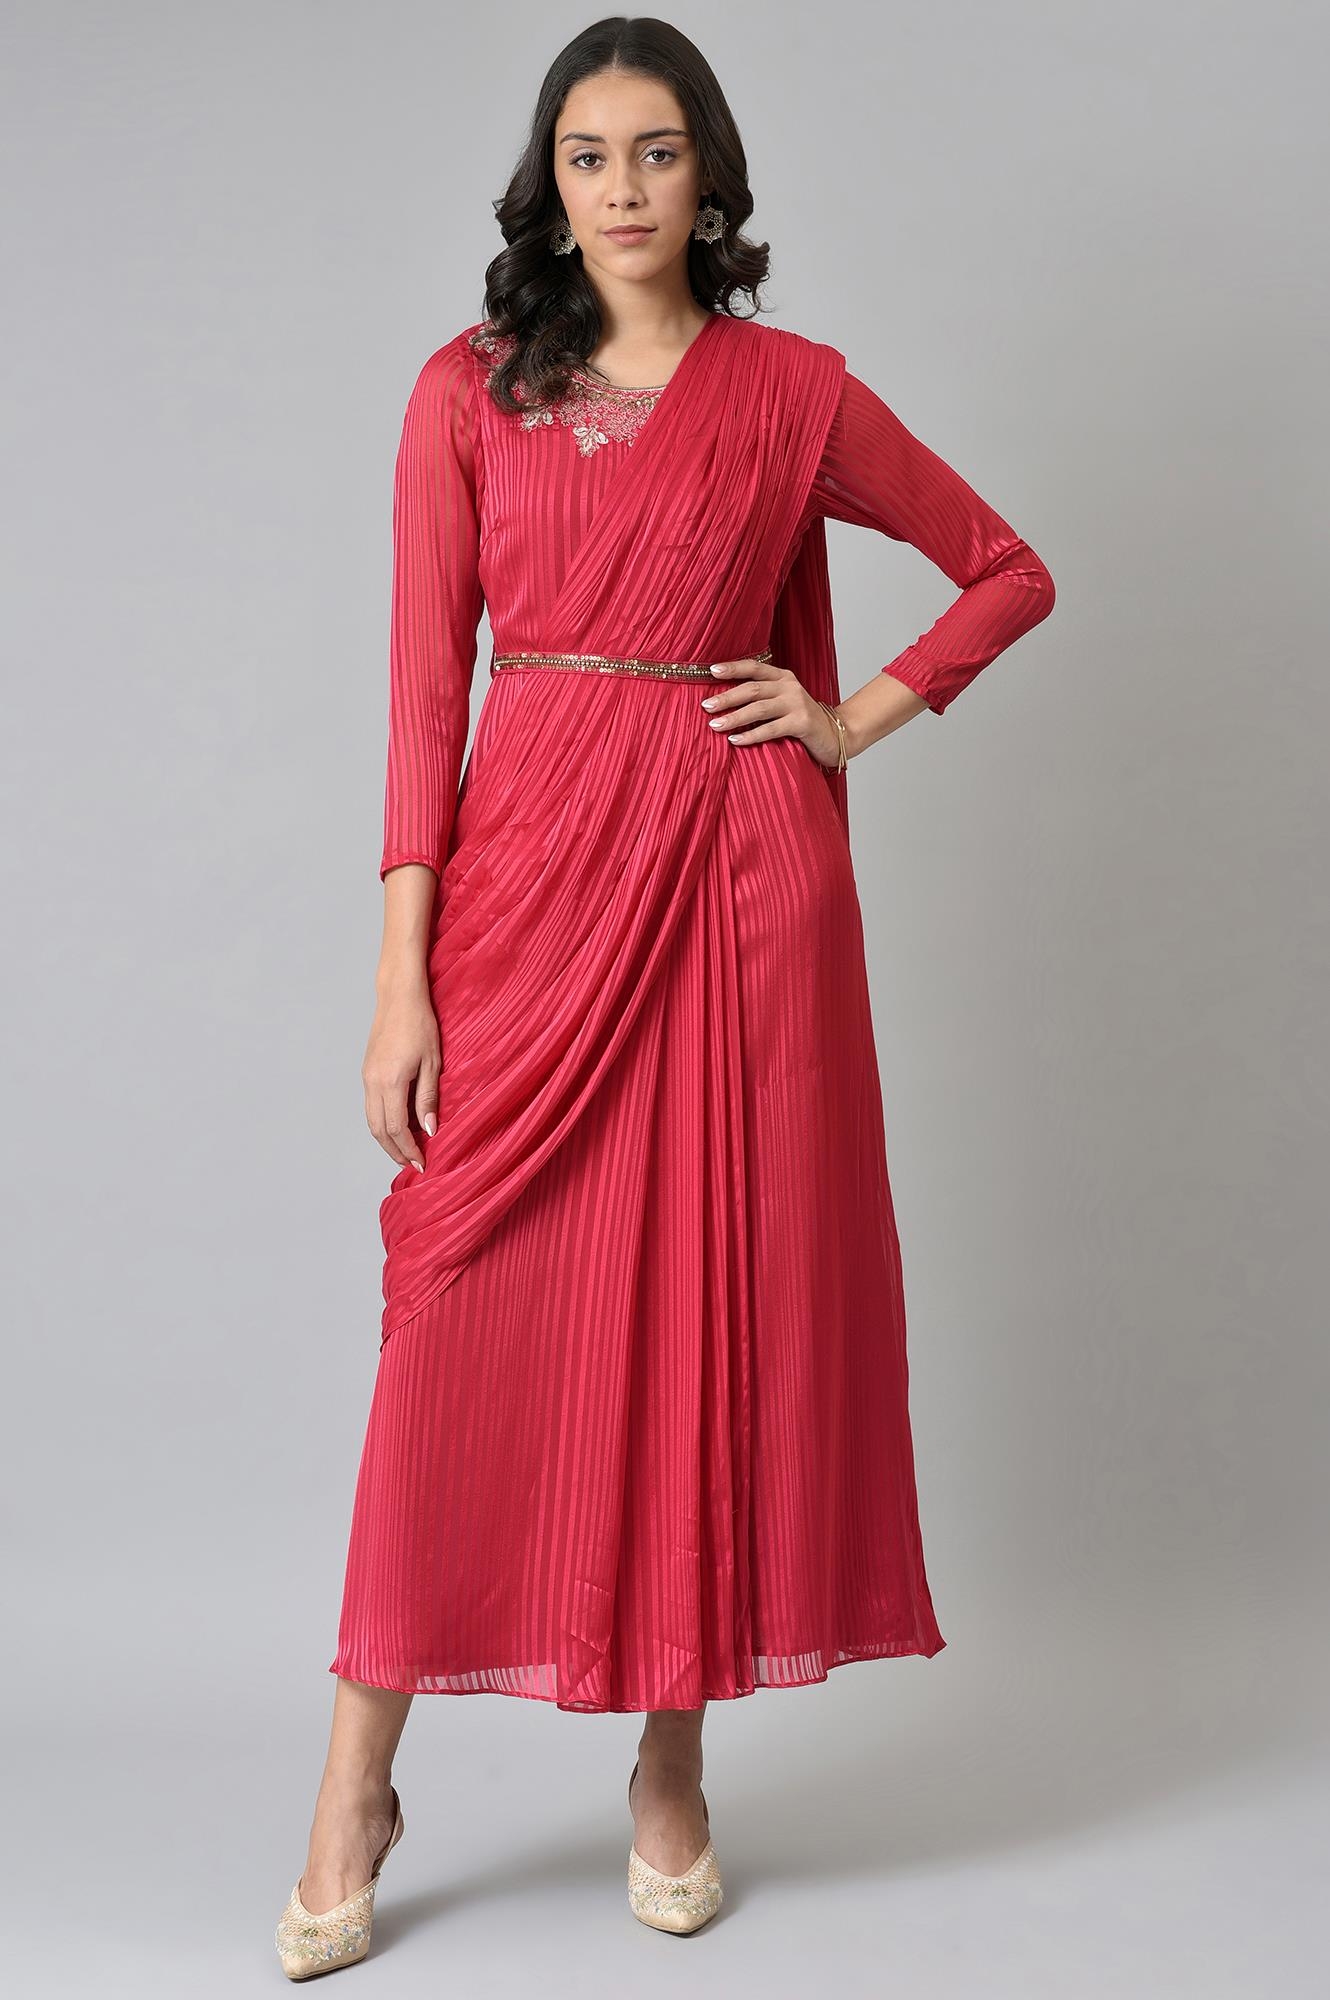 W | Wishful by W Coral Red Embroidered Predape Saree Dress